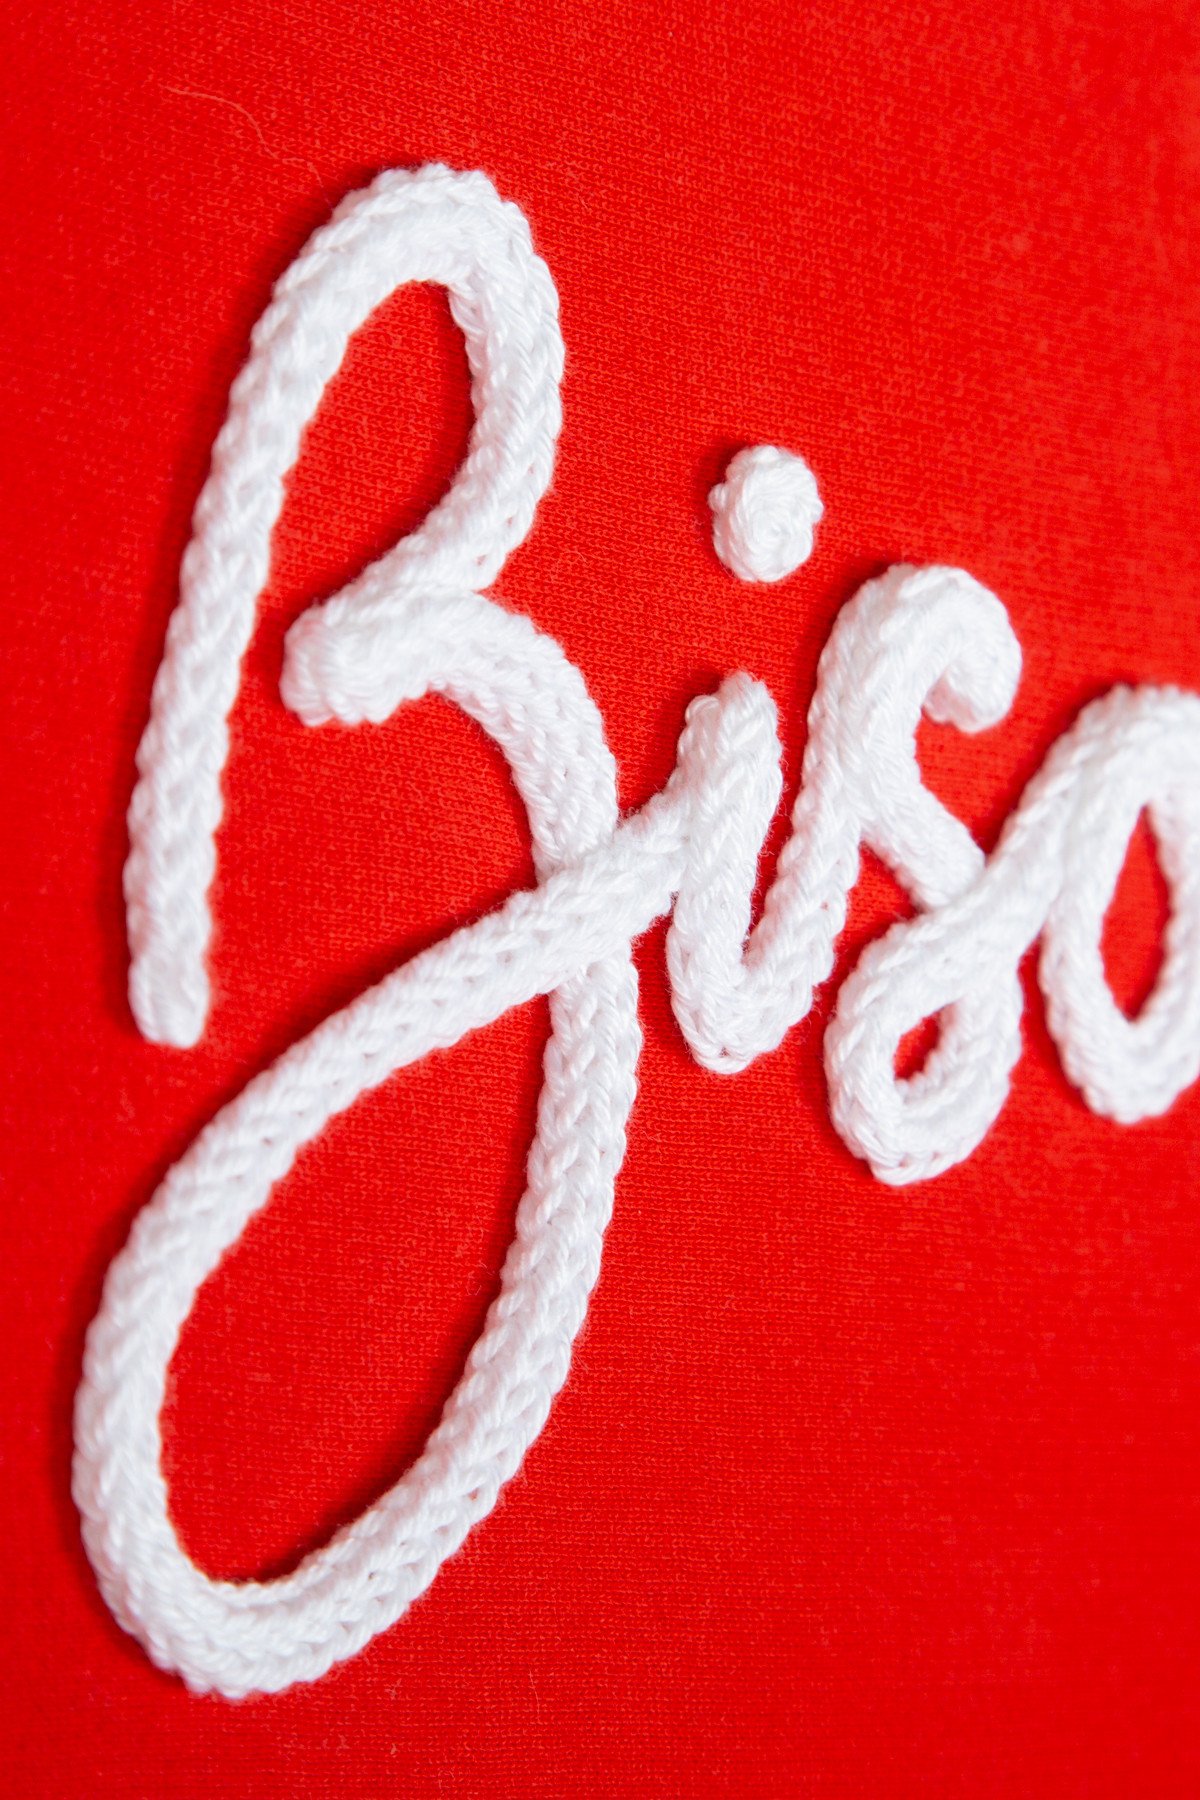 Sweat BISOU tricotin French Disorder